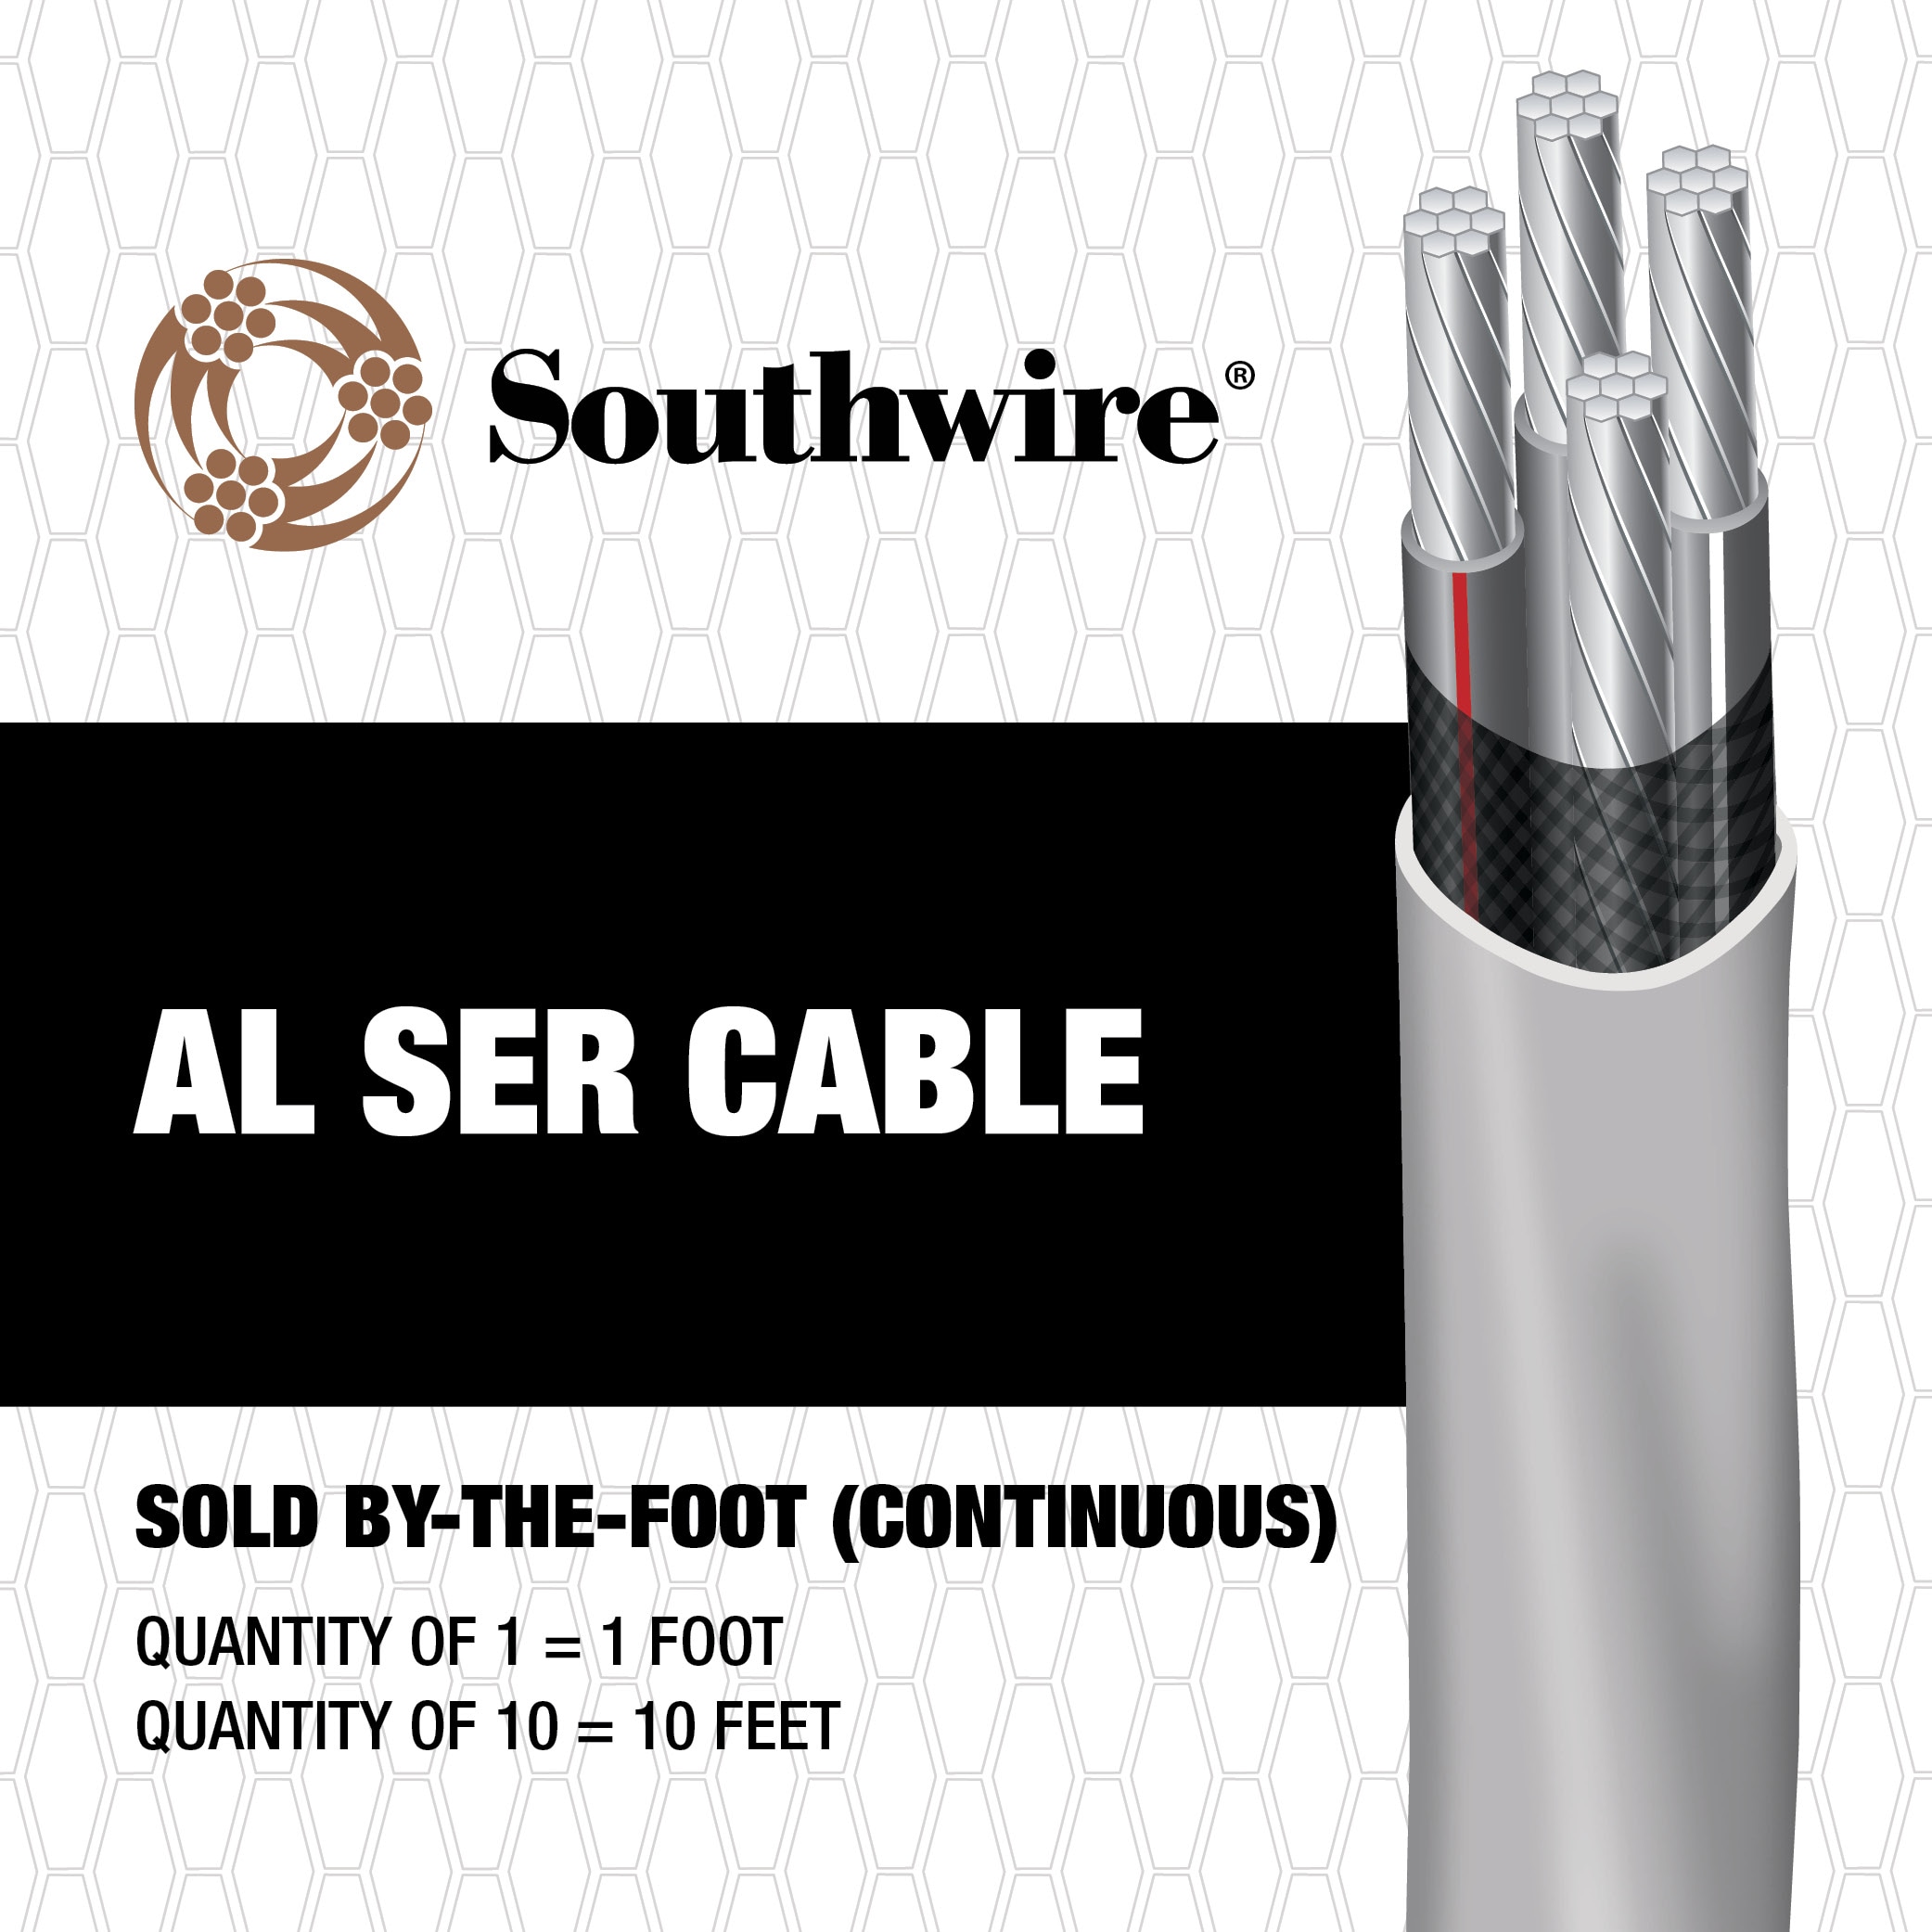 1 Foot Long Electrical Wire & Cable at